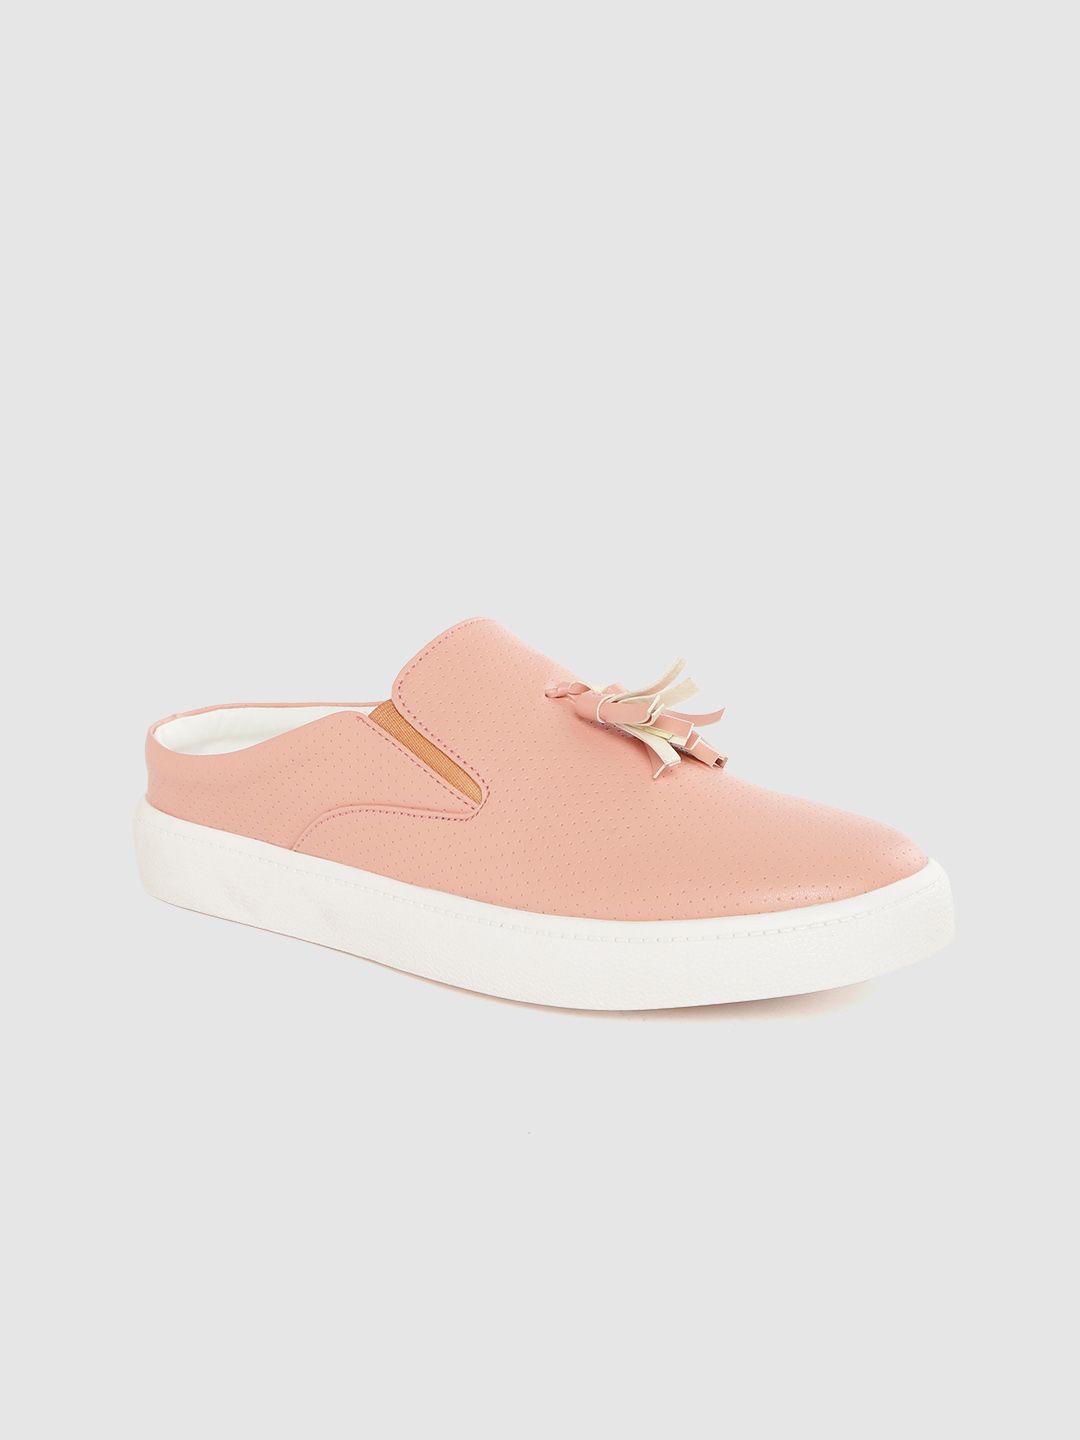 Mast & Harbour Women Peach-Coloured Perforated Mule Sneakers with Tasselled Detail Price in India